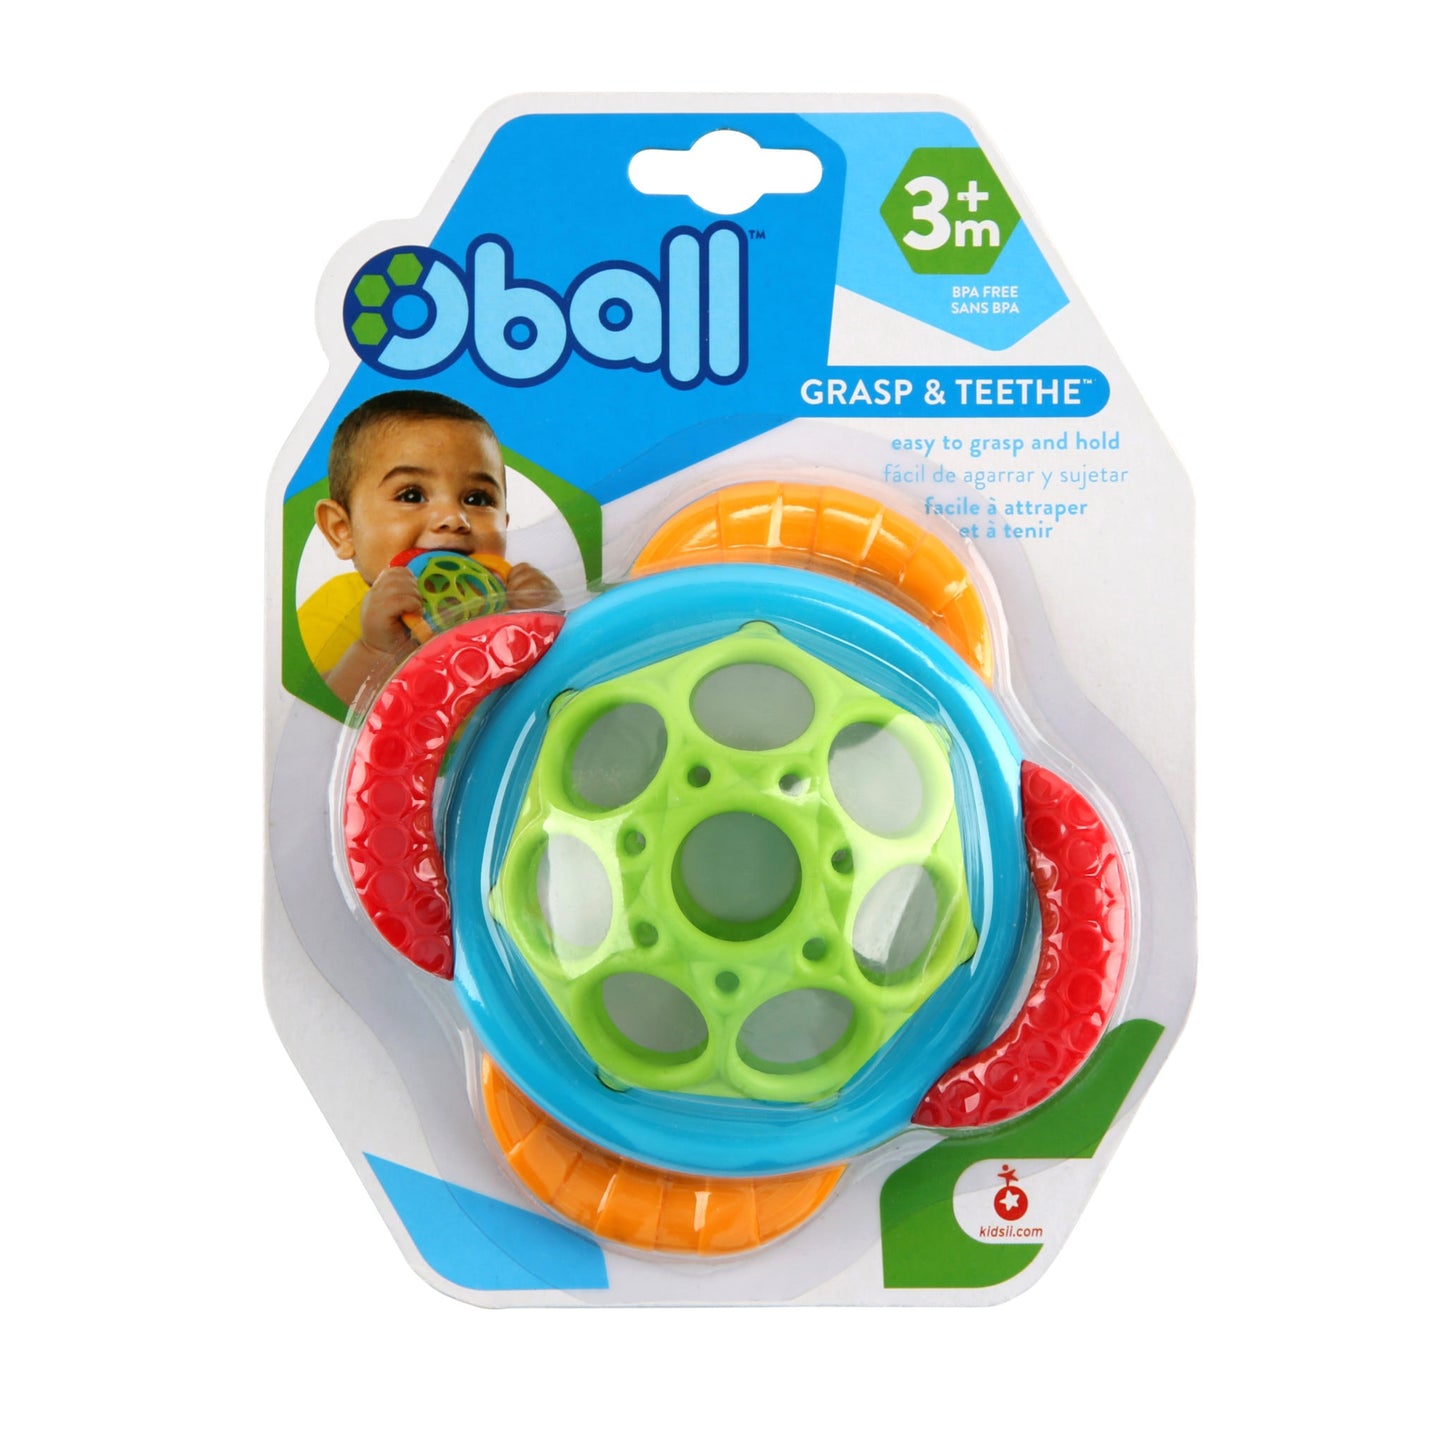 Oball - Grasp & Teether